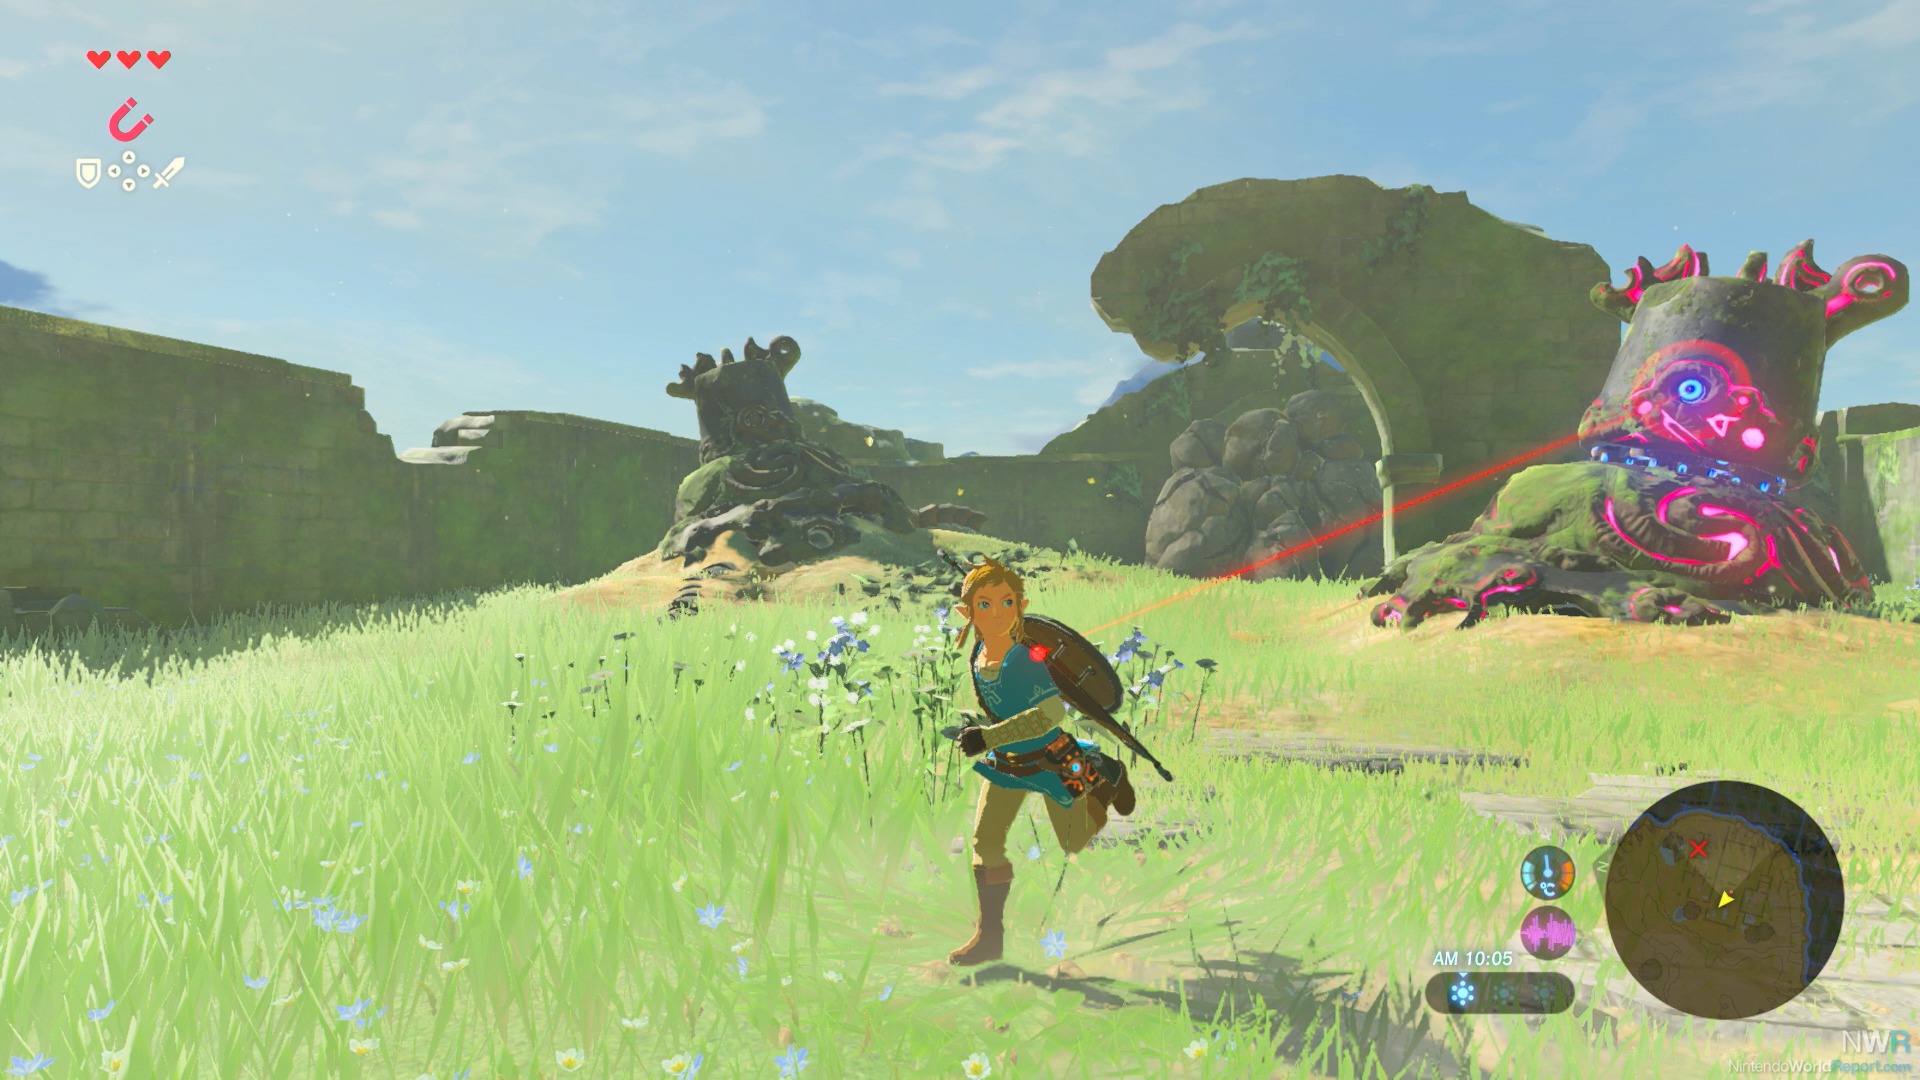 Legend of Zelda: Breath of the Wild Review - A Whole New World